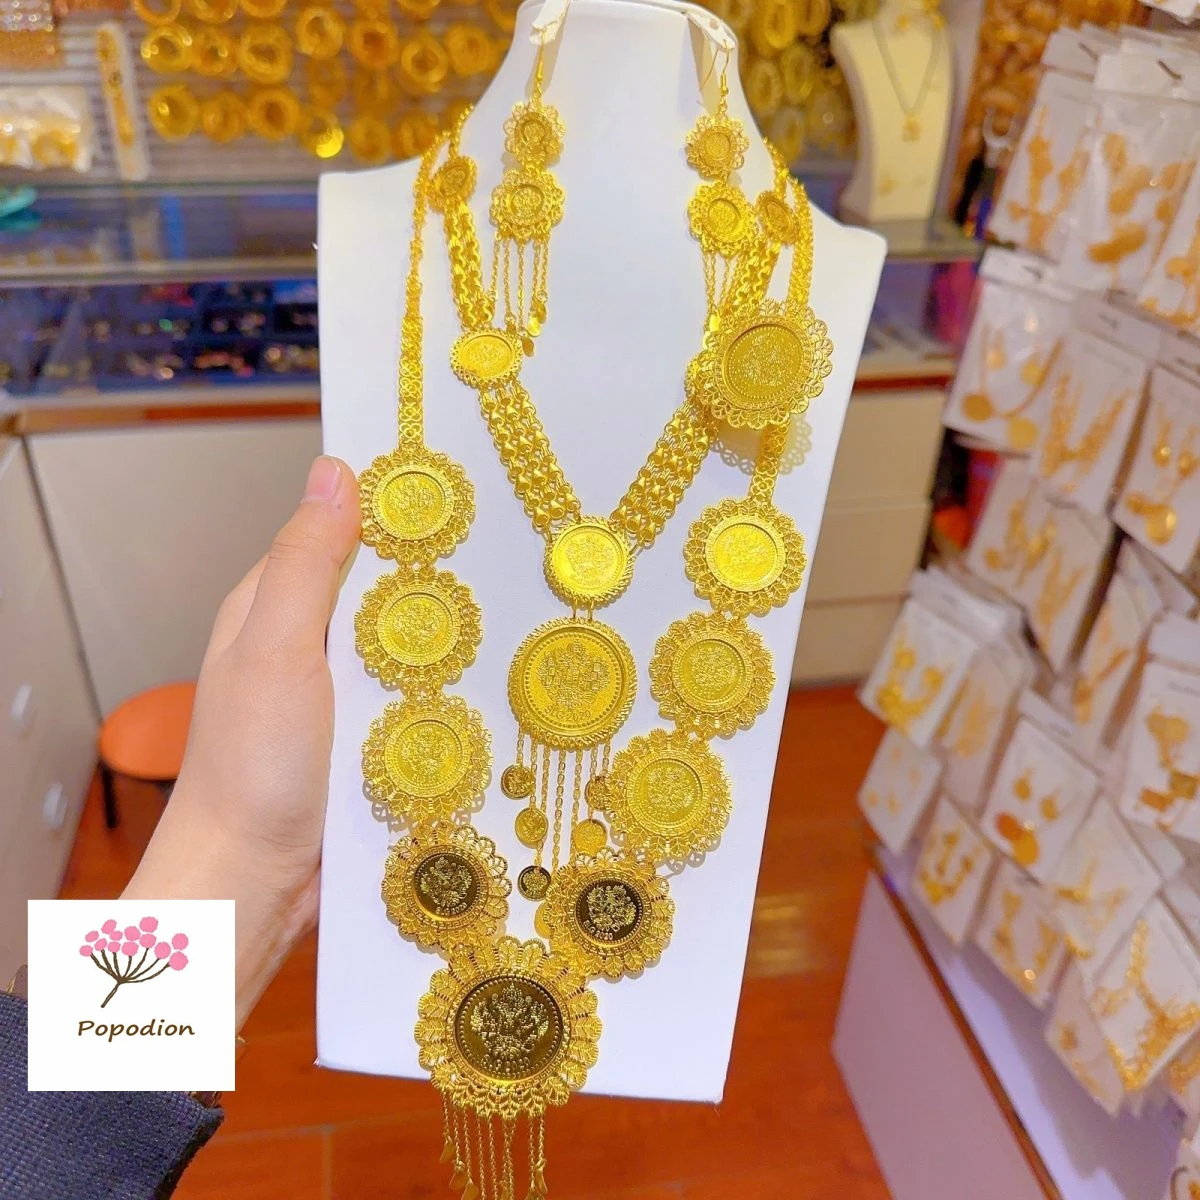 24K Gold Plated Dubai Tassel Necklace Earrings Wedding Party Anniversary Gift Popodion Four Piece Jewelry Set YY10371